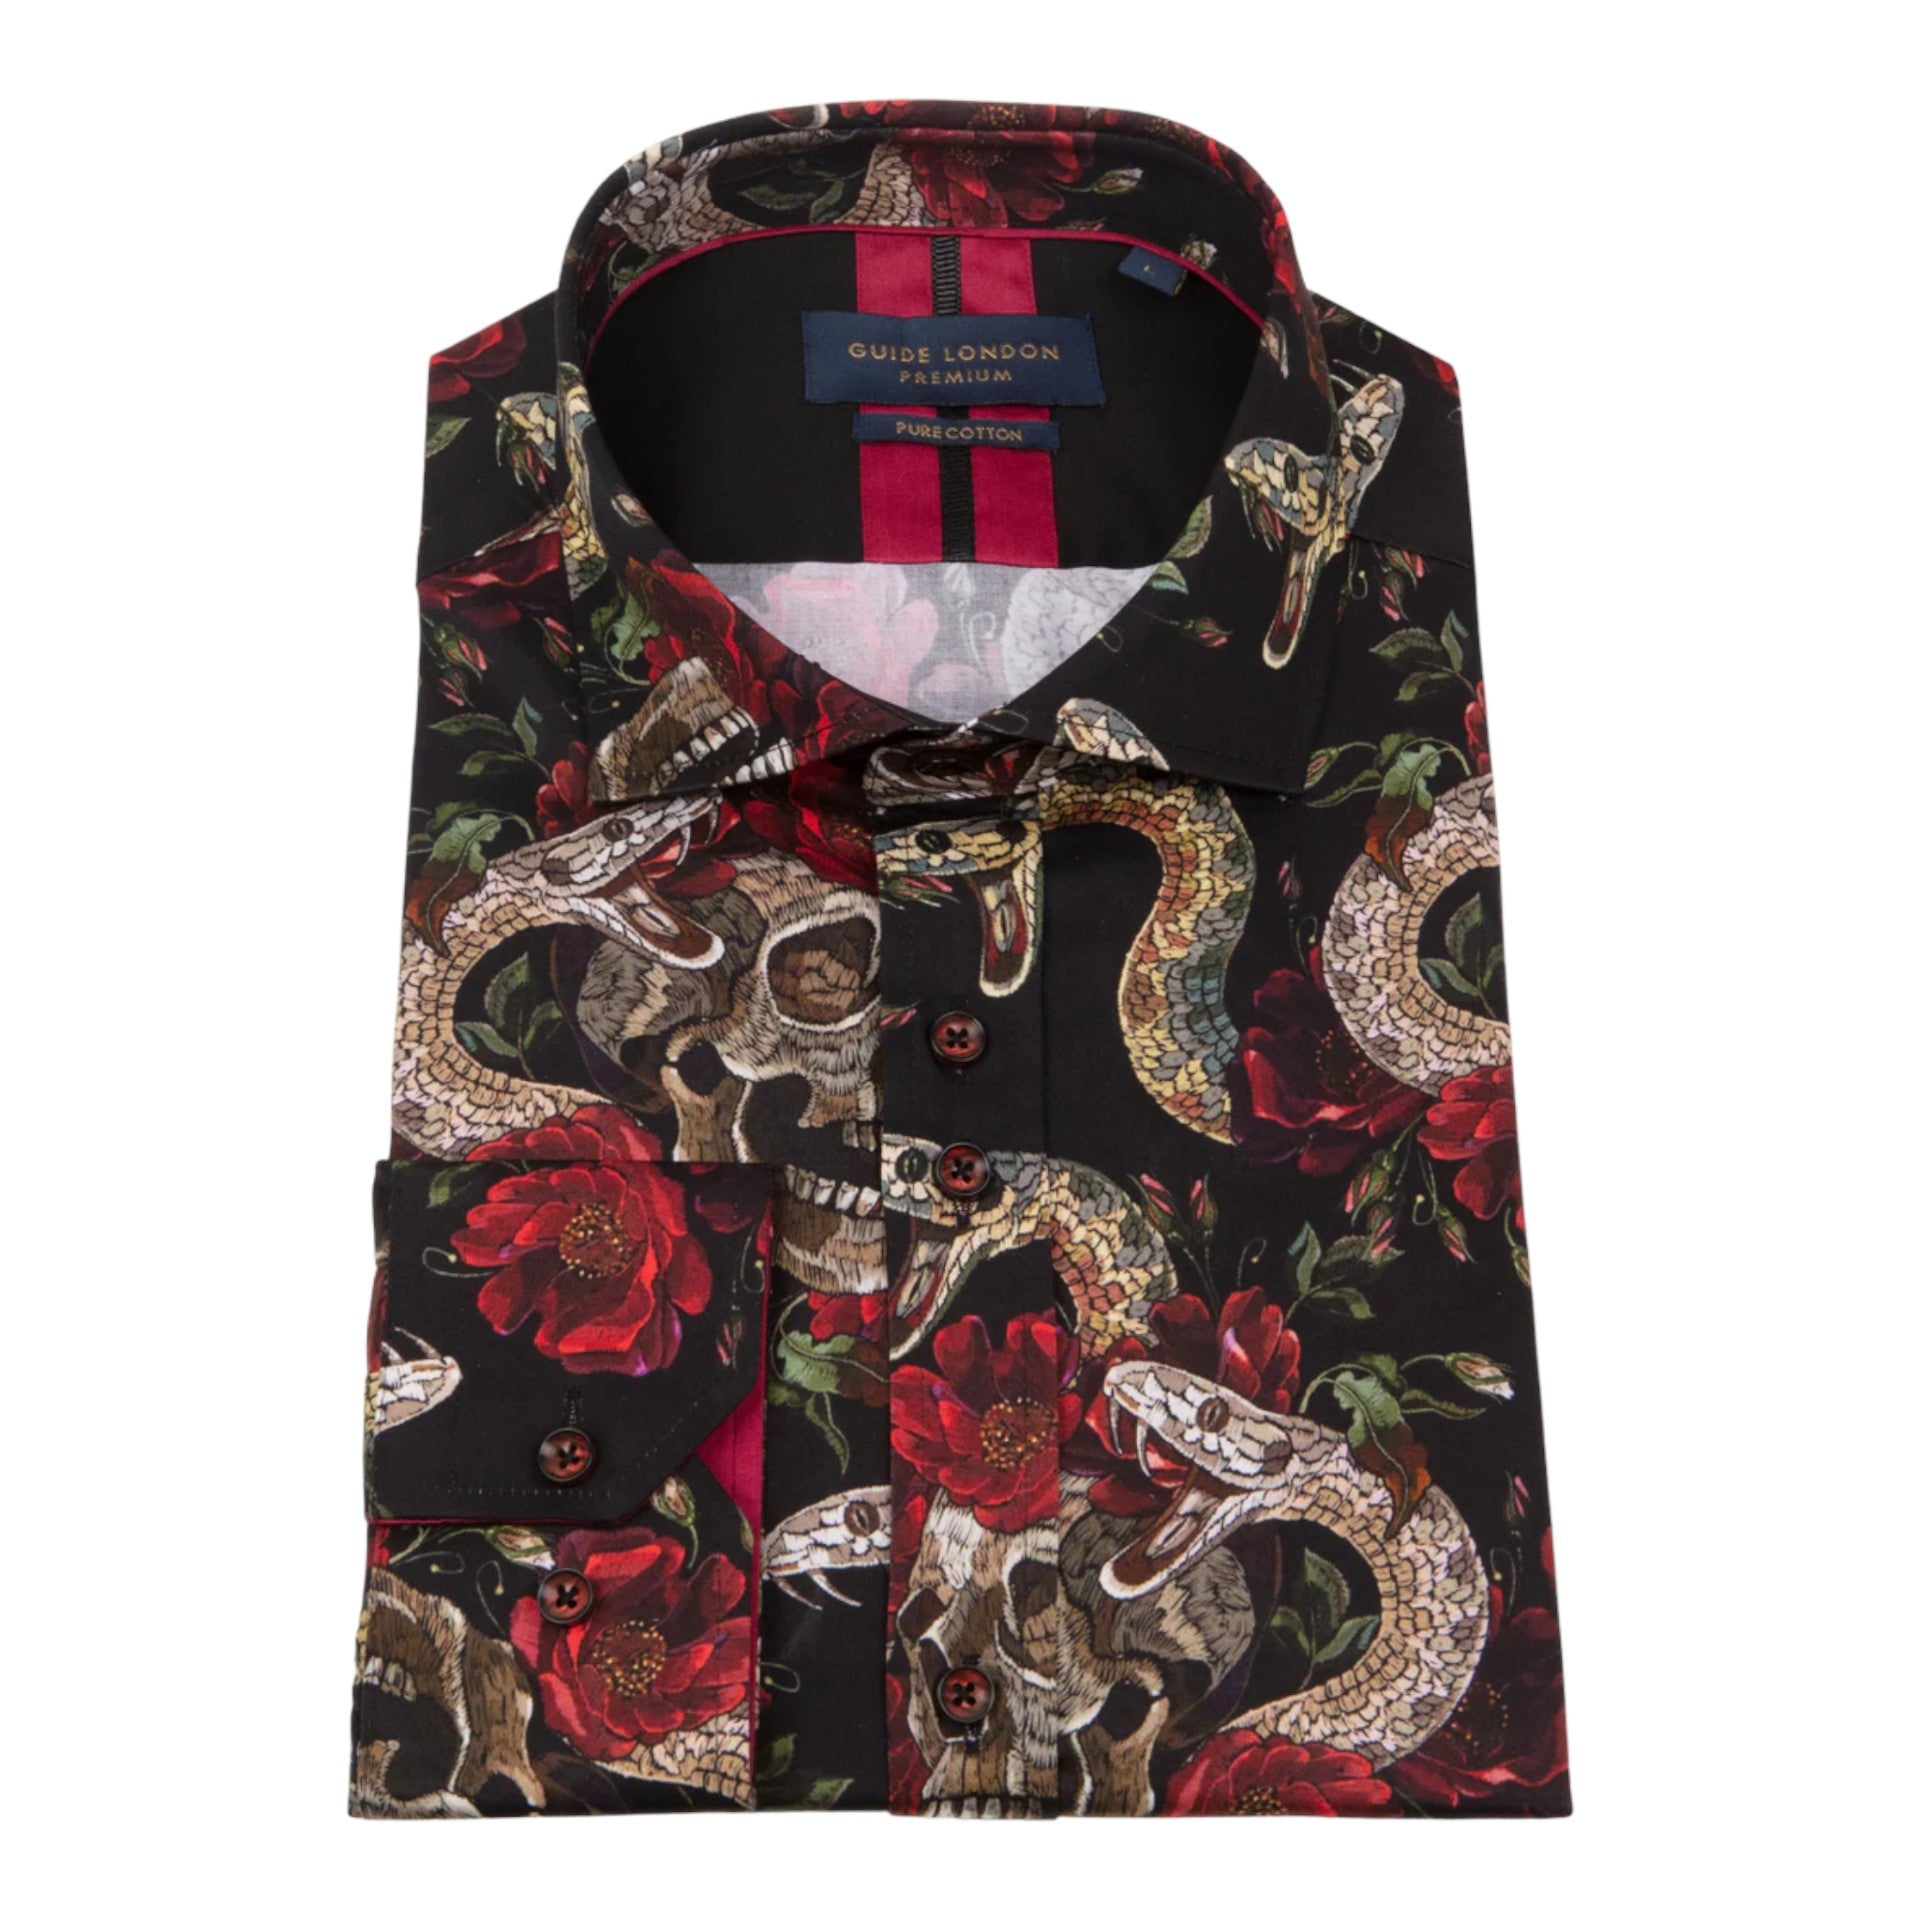 Guide London Edgy Skull, Red Roses, and Snake Print Long Sleeve Shirt (LS76740)